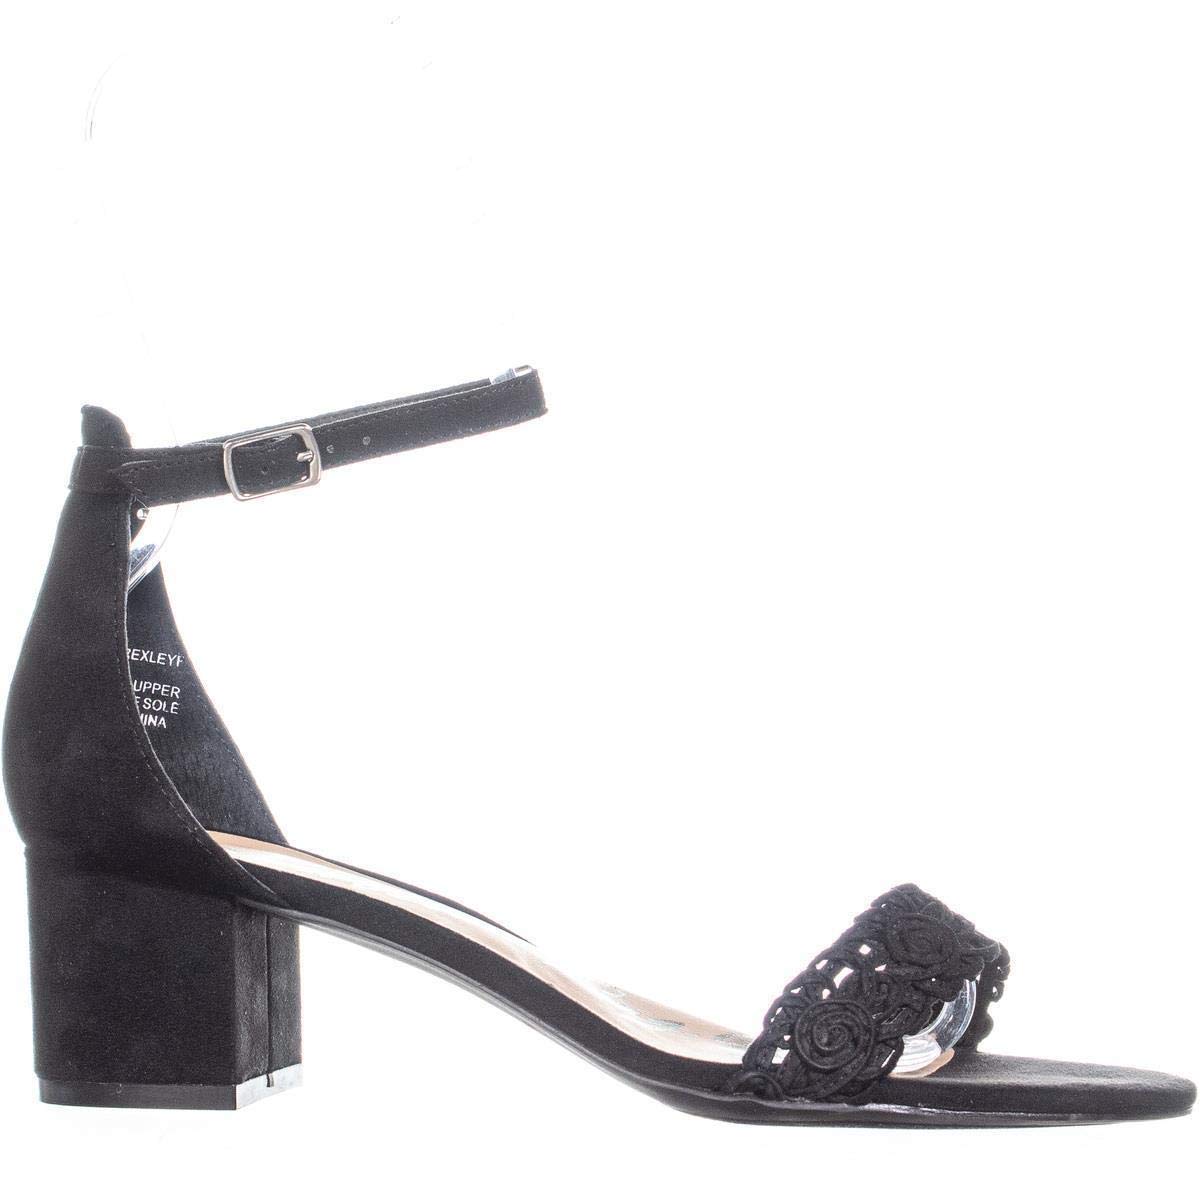 American Rag Womens Brexley Fabric Open Toe Formal Ankle Strap, Black, Size 9.5 - image 2 of 5